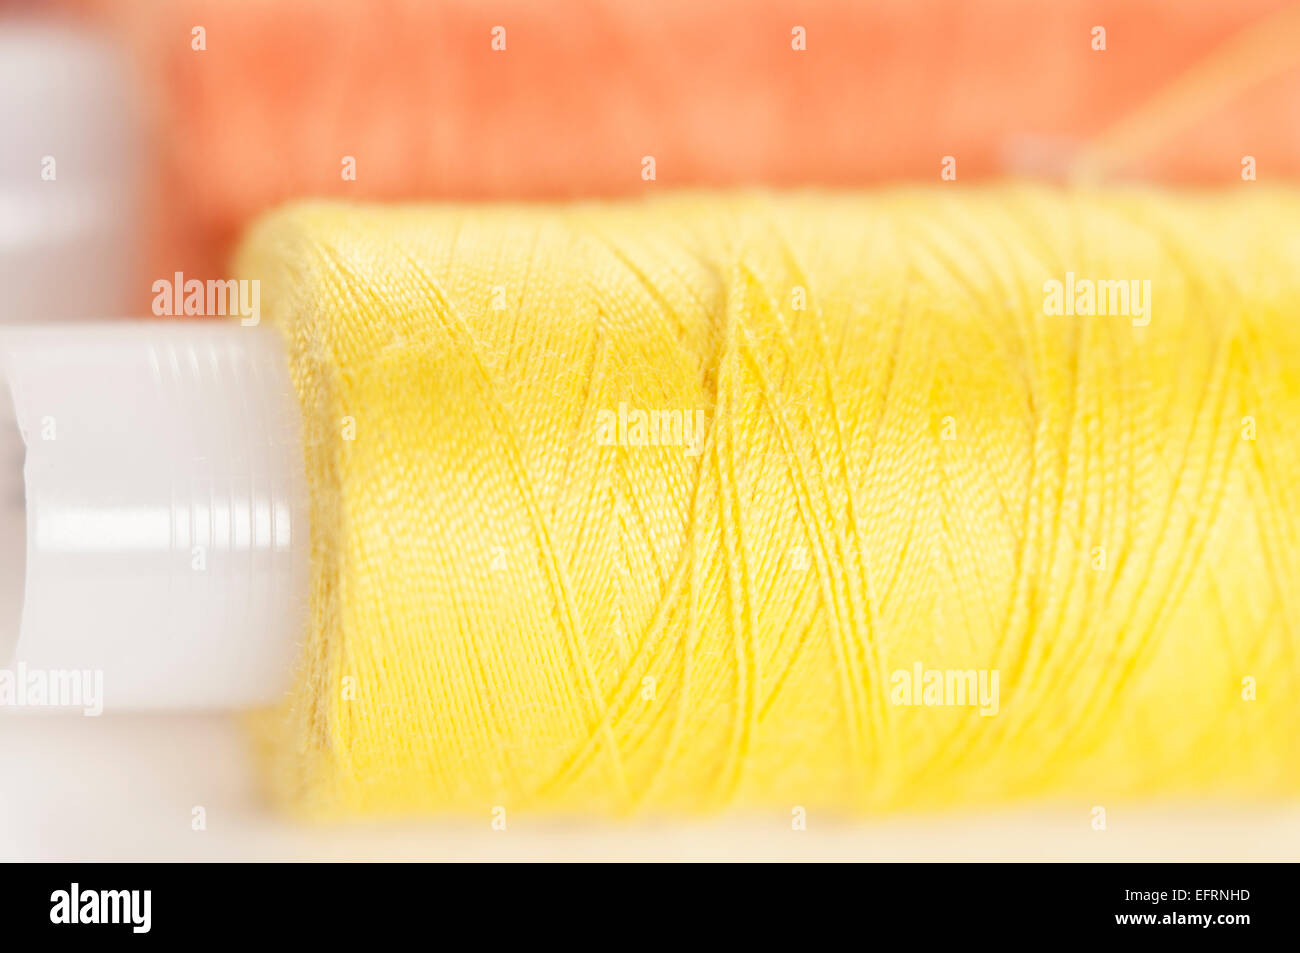 Sewing strings on a light background, macro shot, local focus Stock Photo